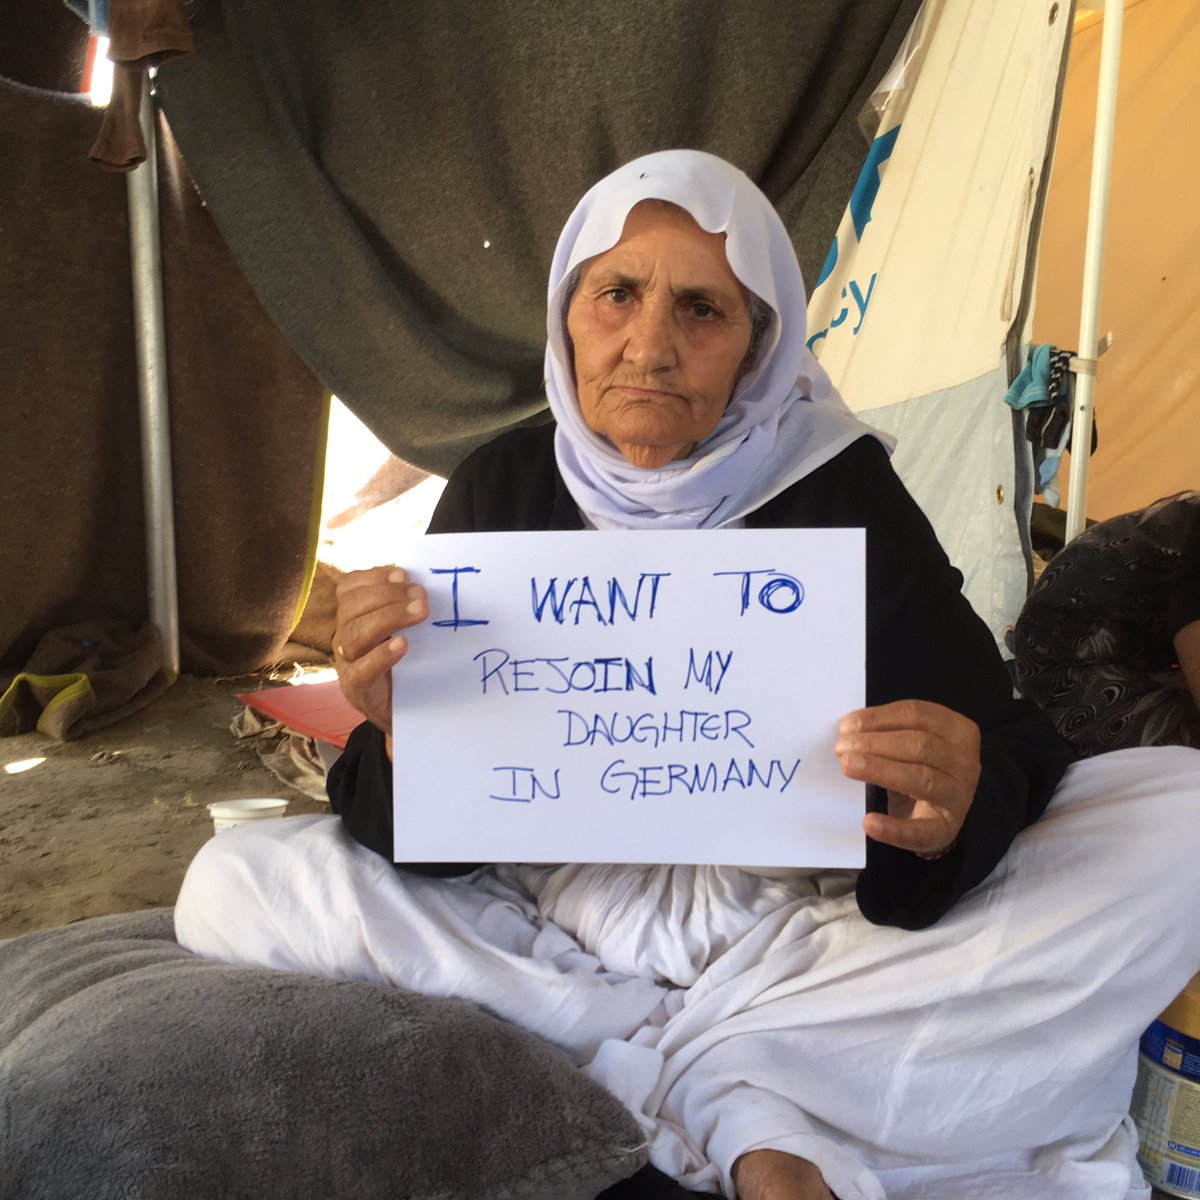 RT @marsemavi: This is Bahar, she is 91 and travelled from #Iraq to #Greece. She wants to rejoin her daughter in Germany #NeaKavala https:/…